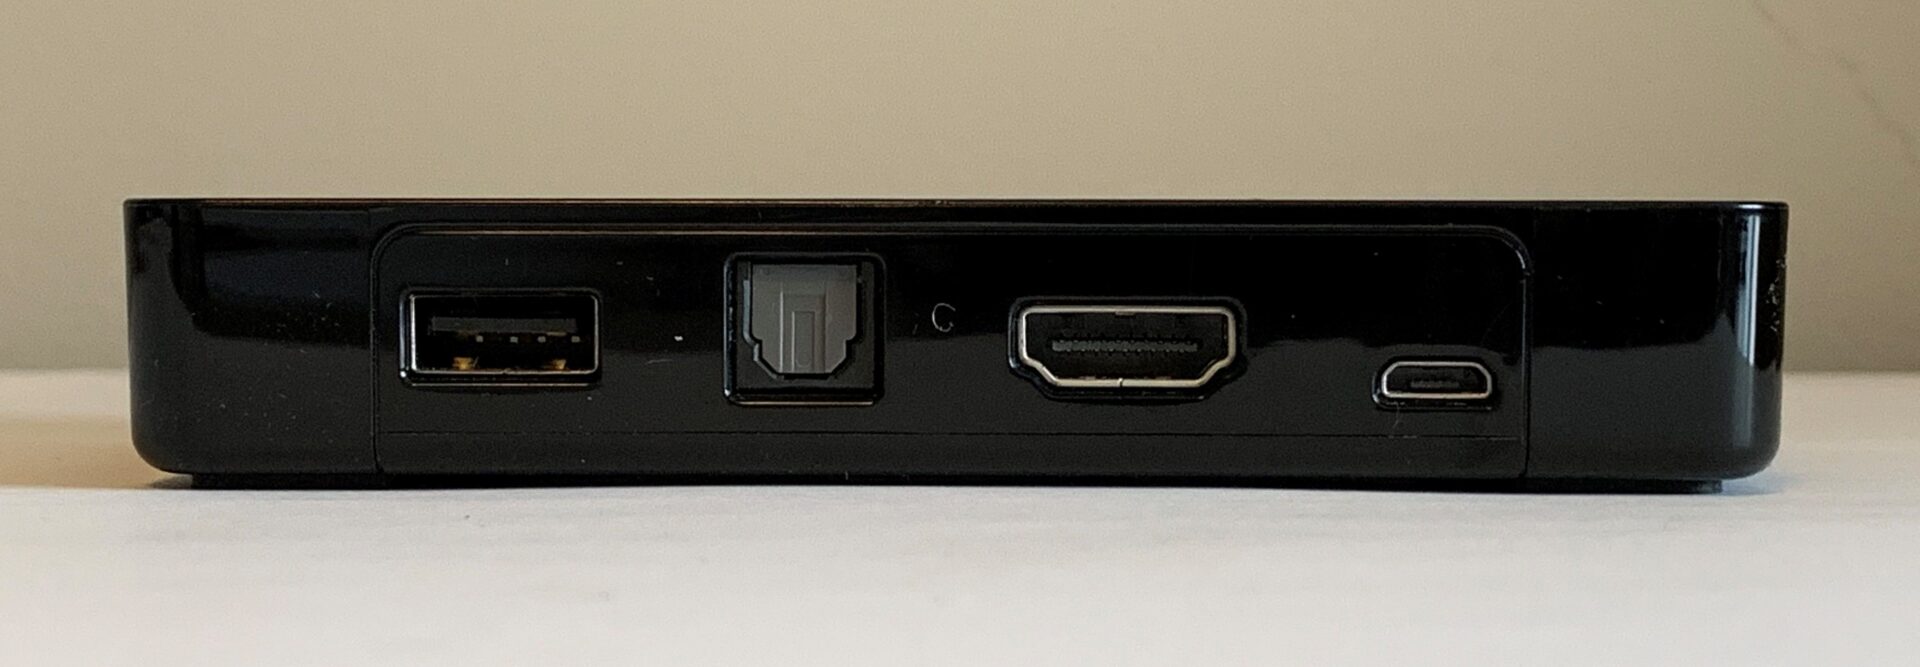 A black box with a hdmi port and a usb port.